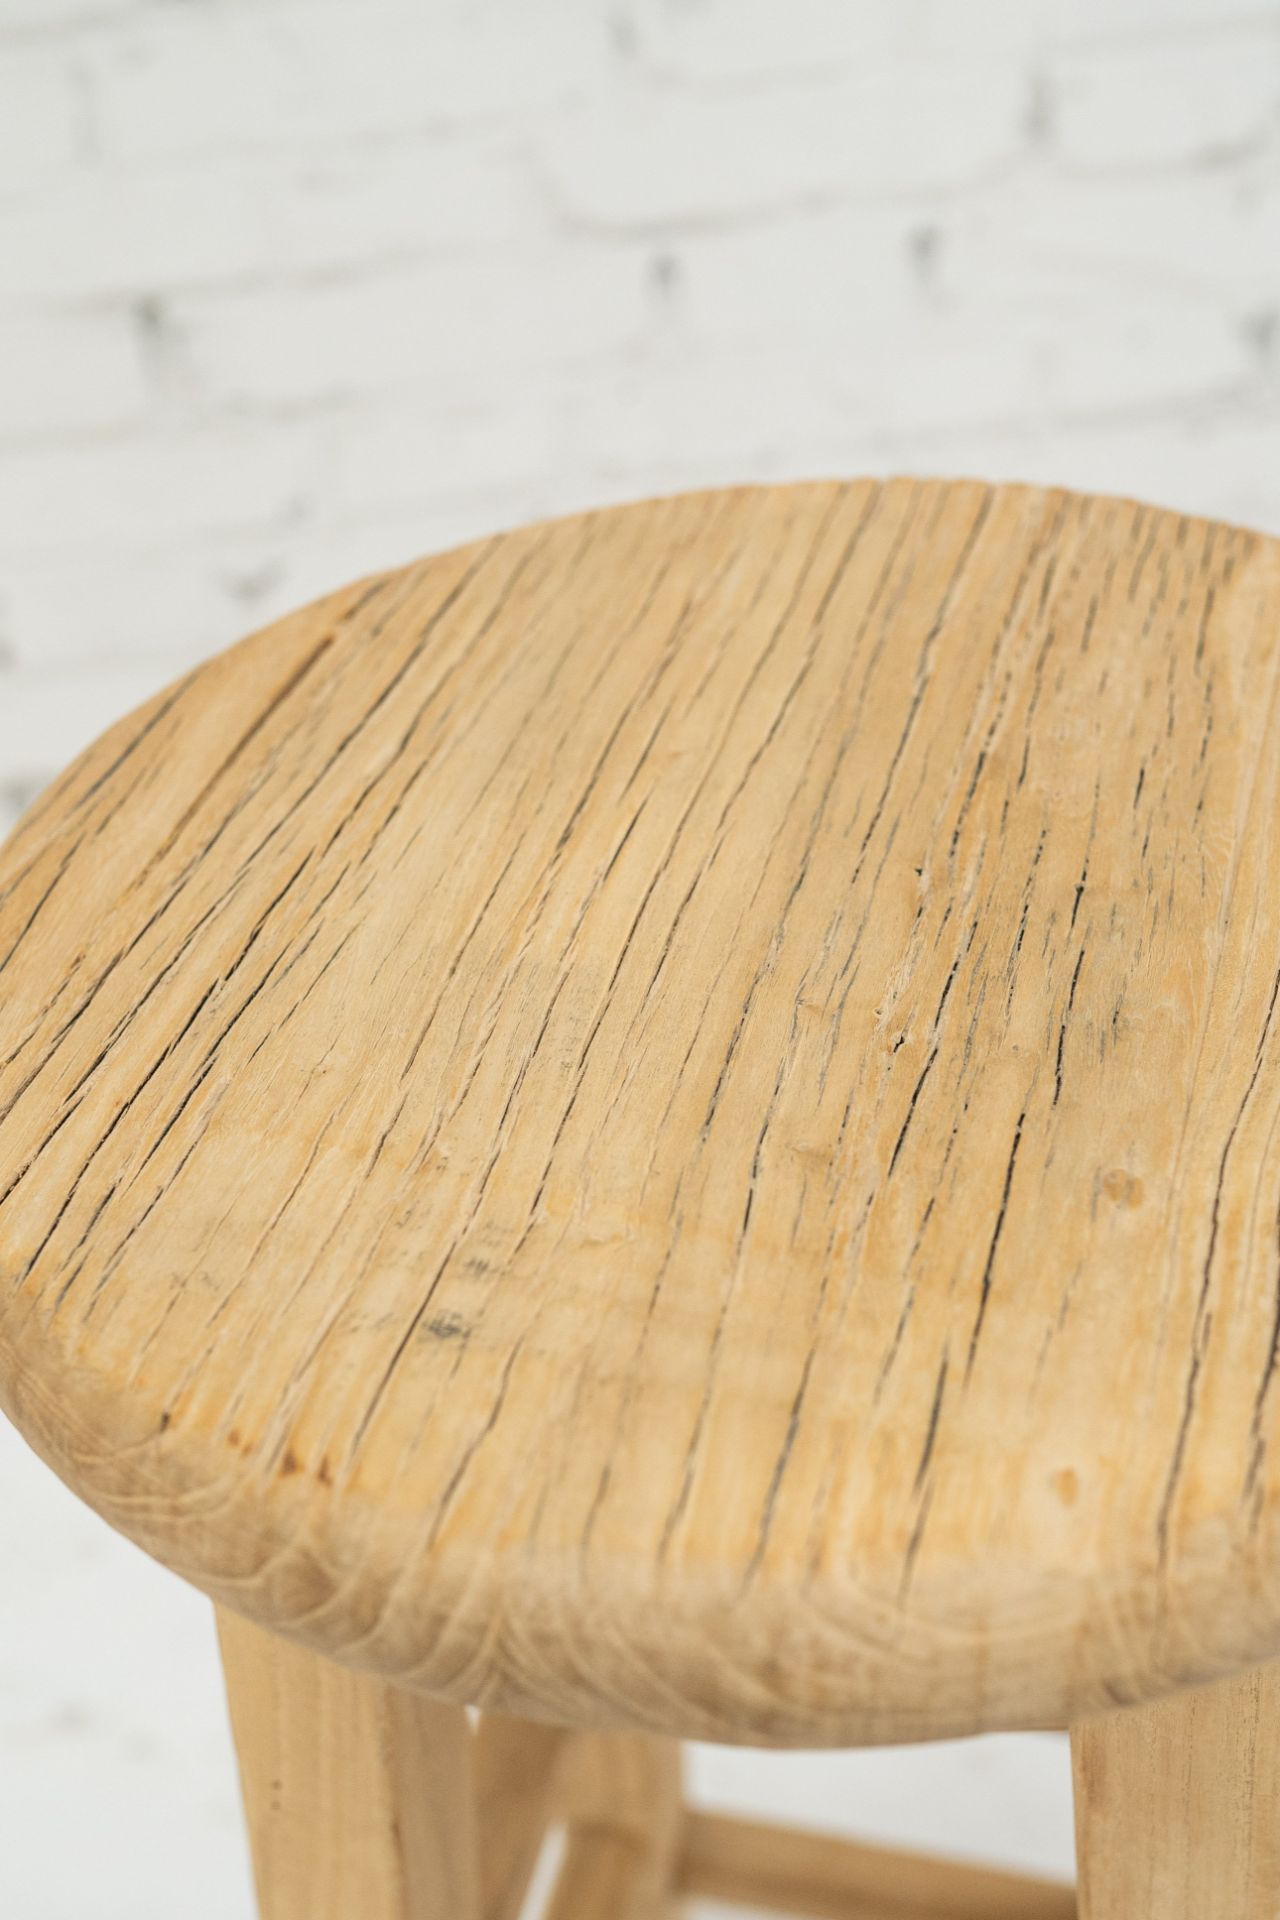 2 x Tall Elm Stool: Stunning wooden bar stools from the Heibei provence of China. - Image 5 of 5